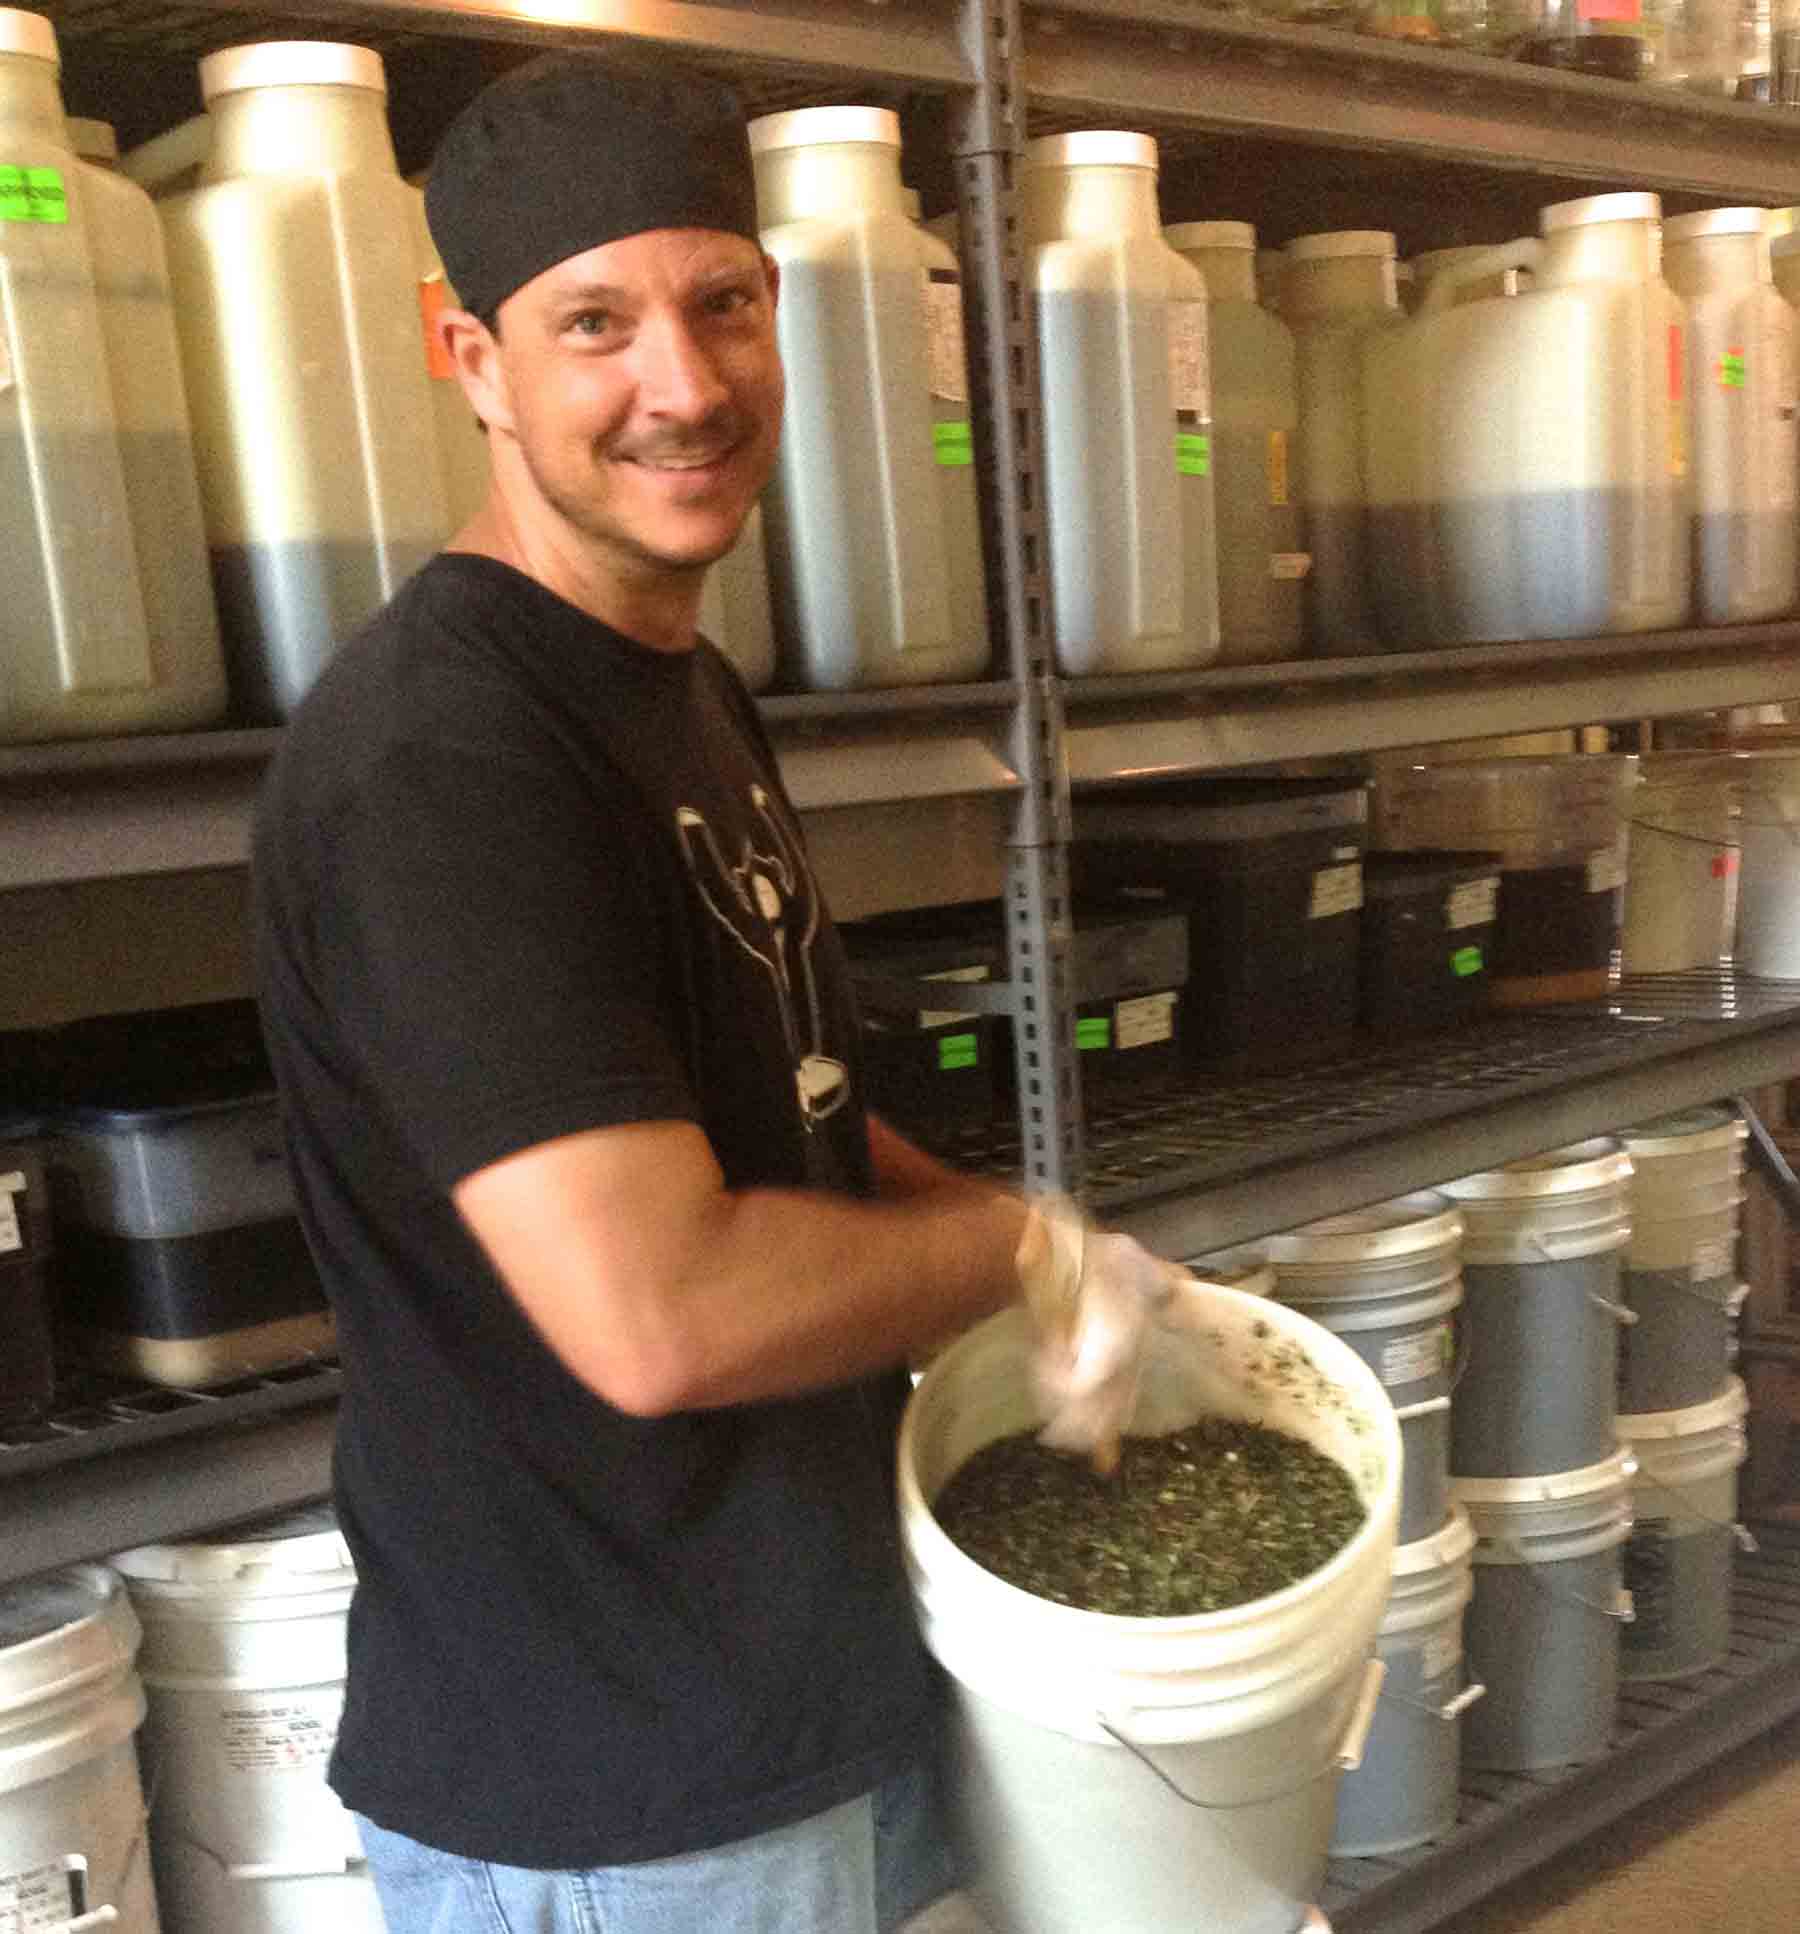 Meet the Man Behind the Tinctures